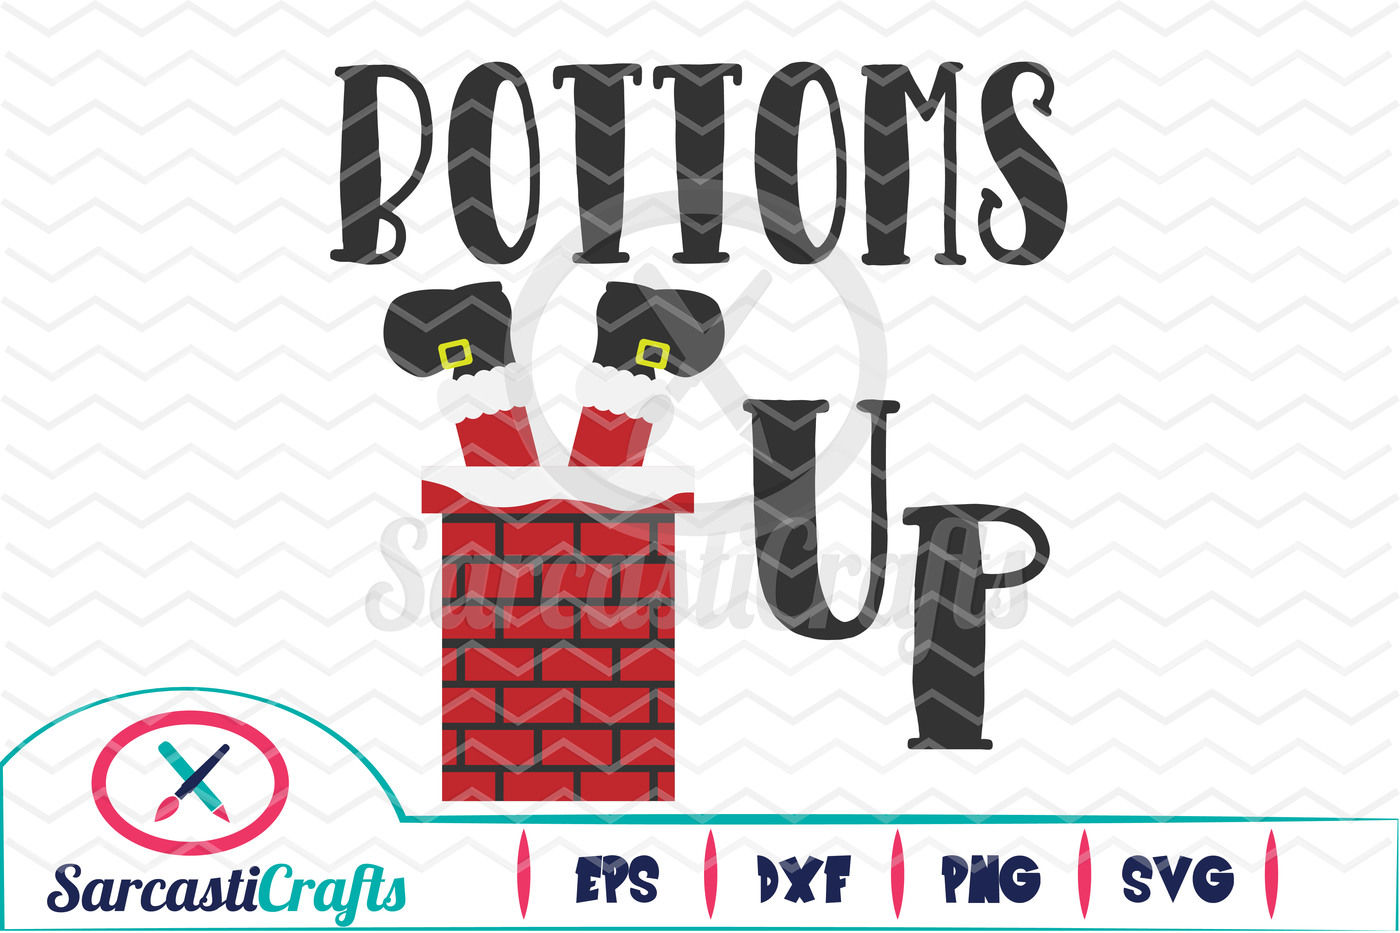 Download Bottoms Up Christmas Graphic Svg Eps Dxf Png By Sarcasticrafts Thehungryjpeg Com